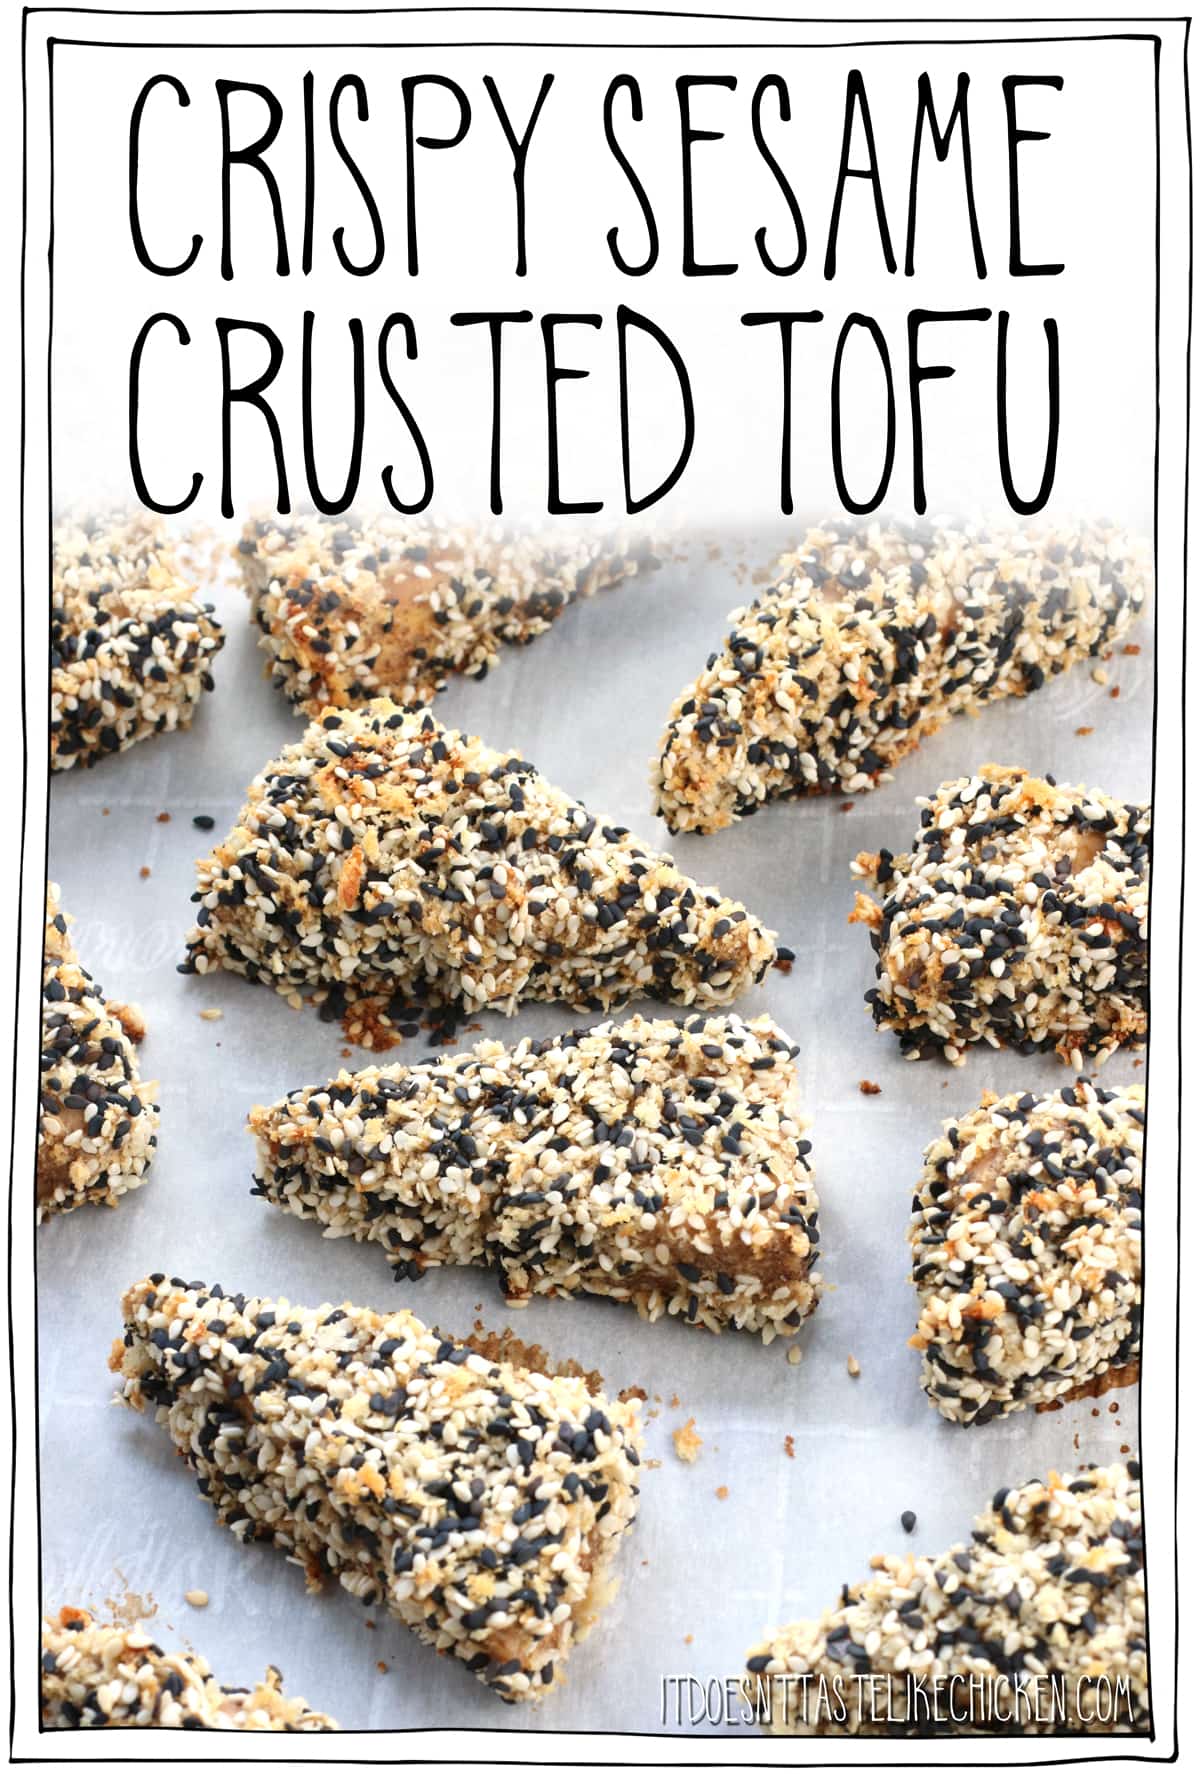 Crispy Sesame Crusted Tofu! Marinated tofu in a crispy crunch sesame crust. Great for a vegan appetizer or as a main dish served with your favourite sides. Gluten-free and oil-free options. #itdoesnttastelikechicken #veganrecipe #tofu